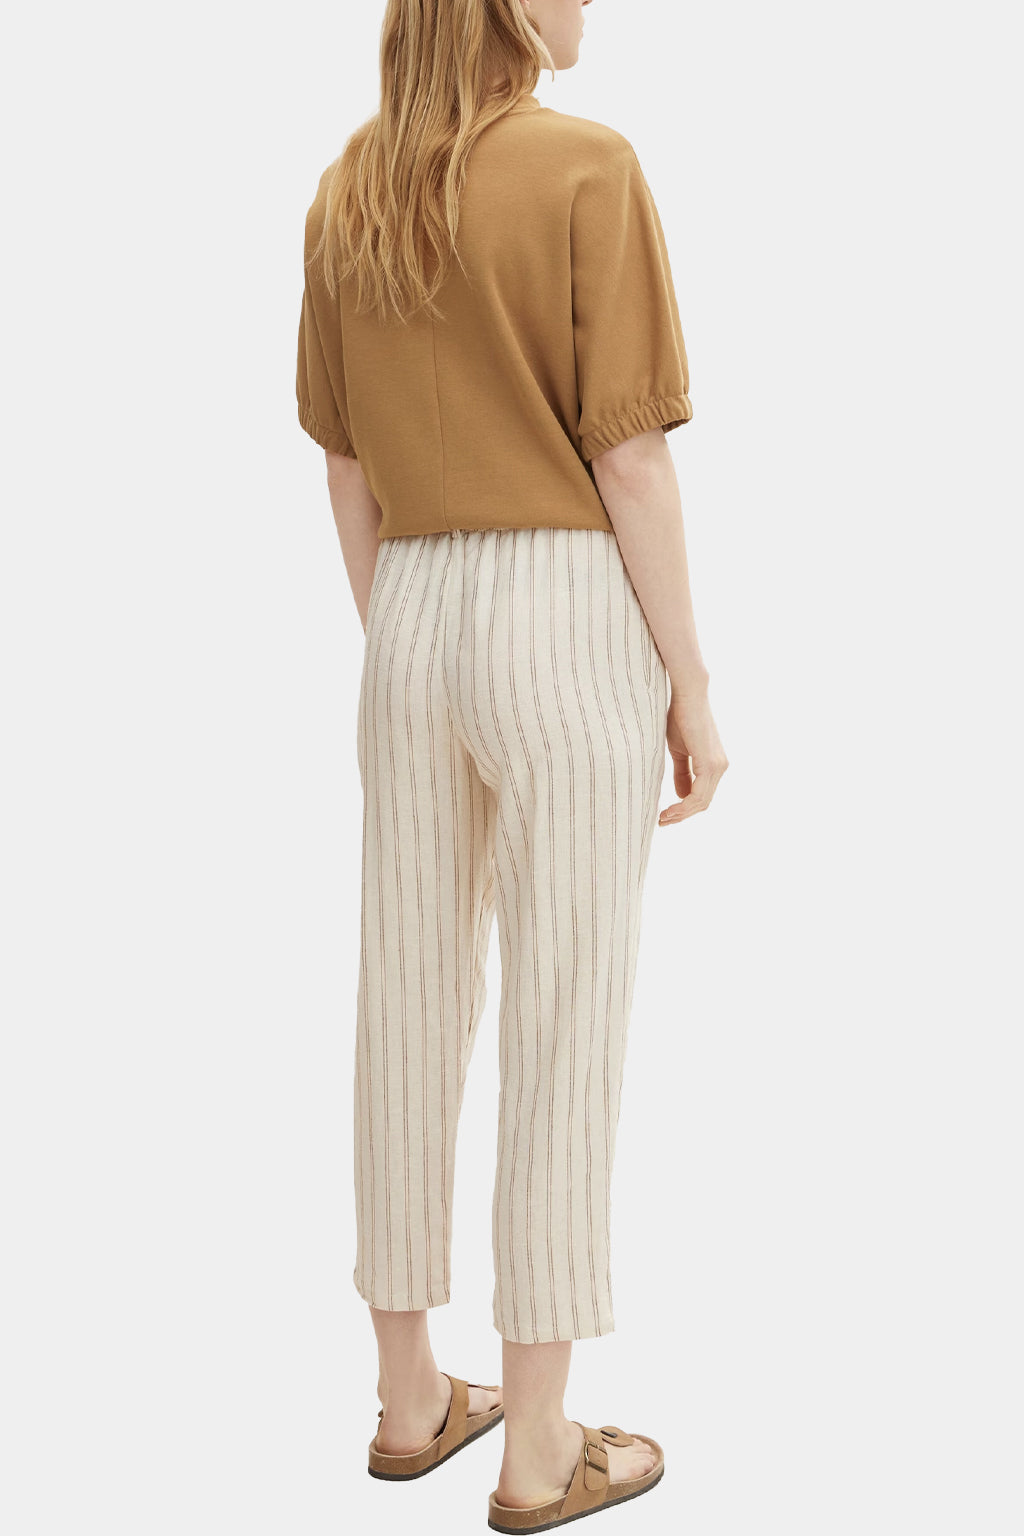 Tom Tailor - Fabric Trousers With Linen